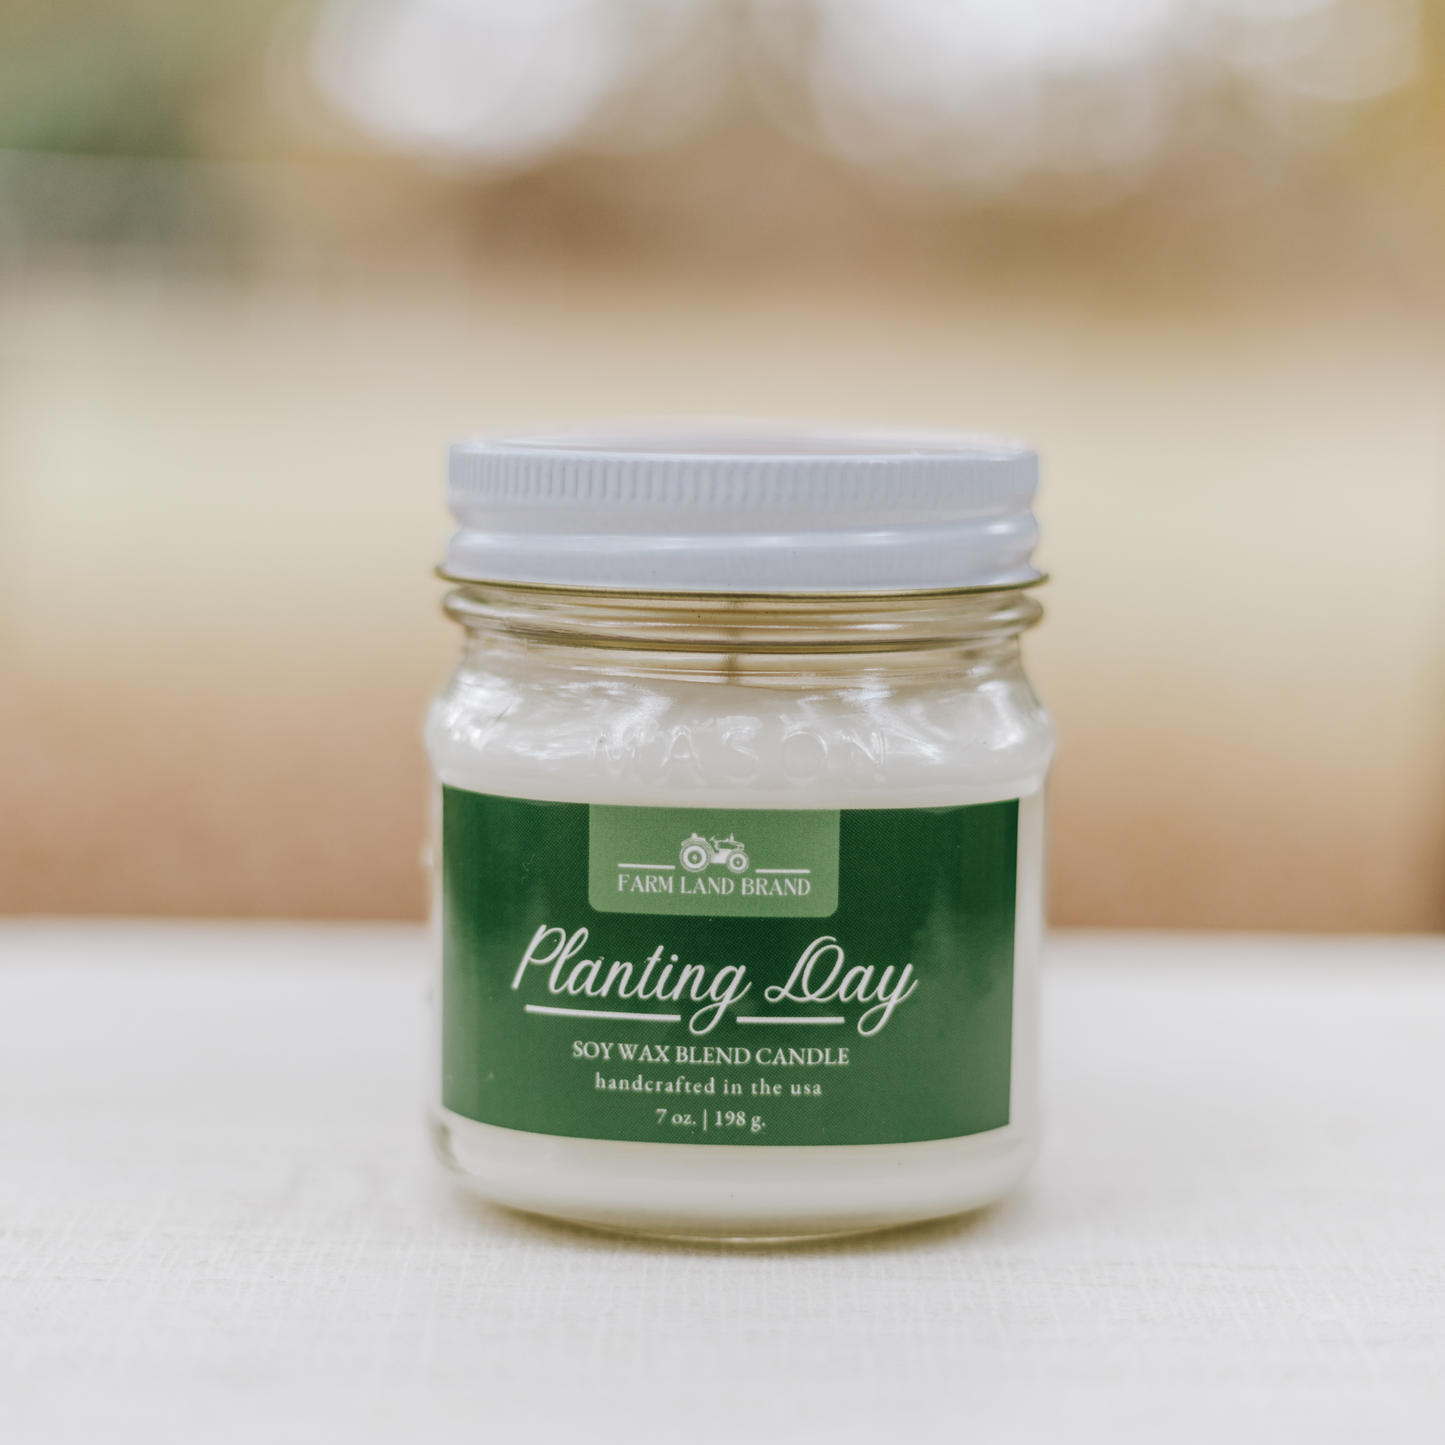 Planting Day Soy Wax Blend Candle